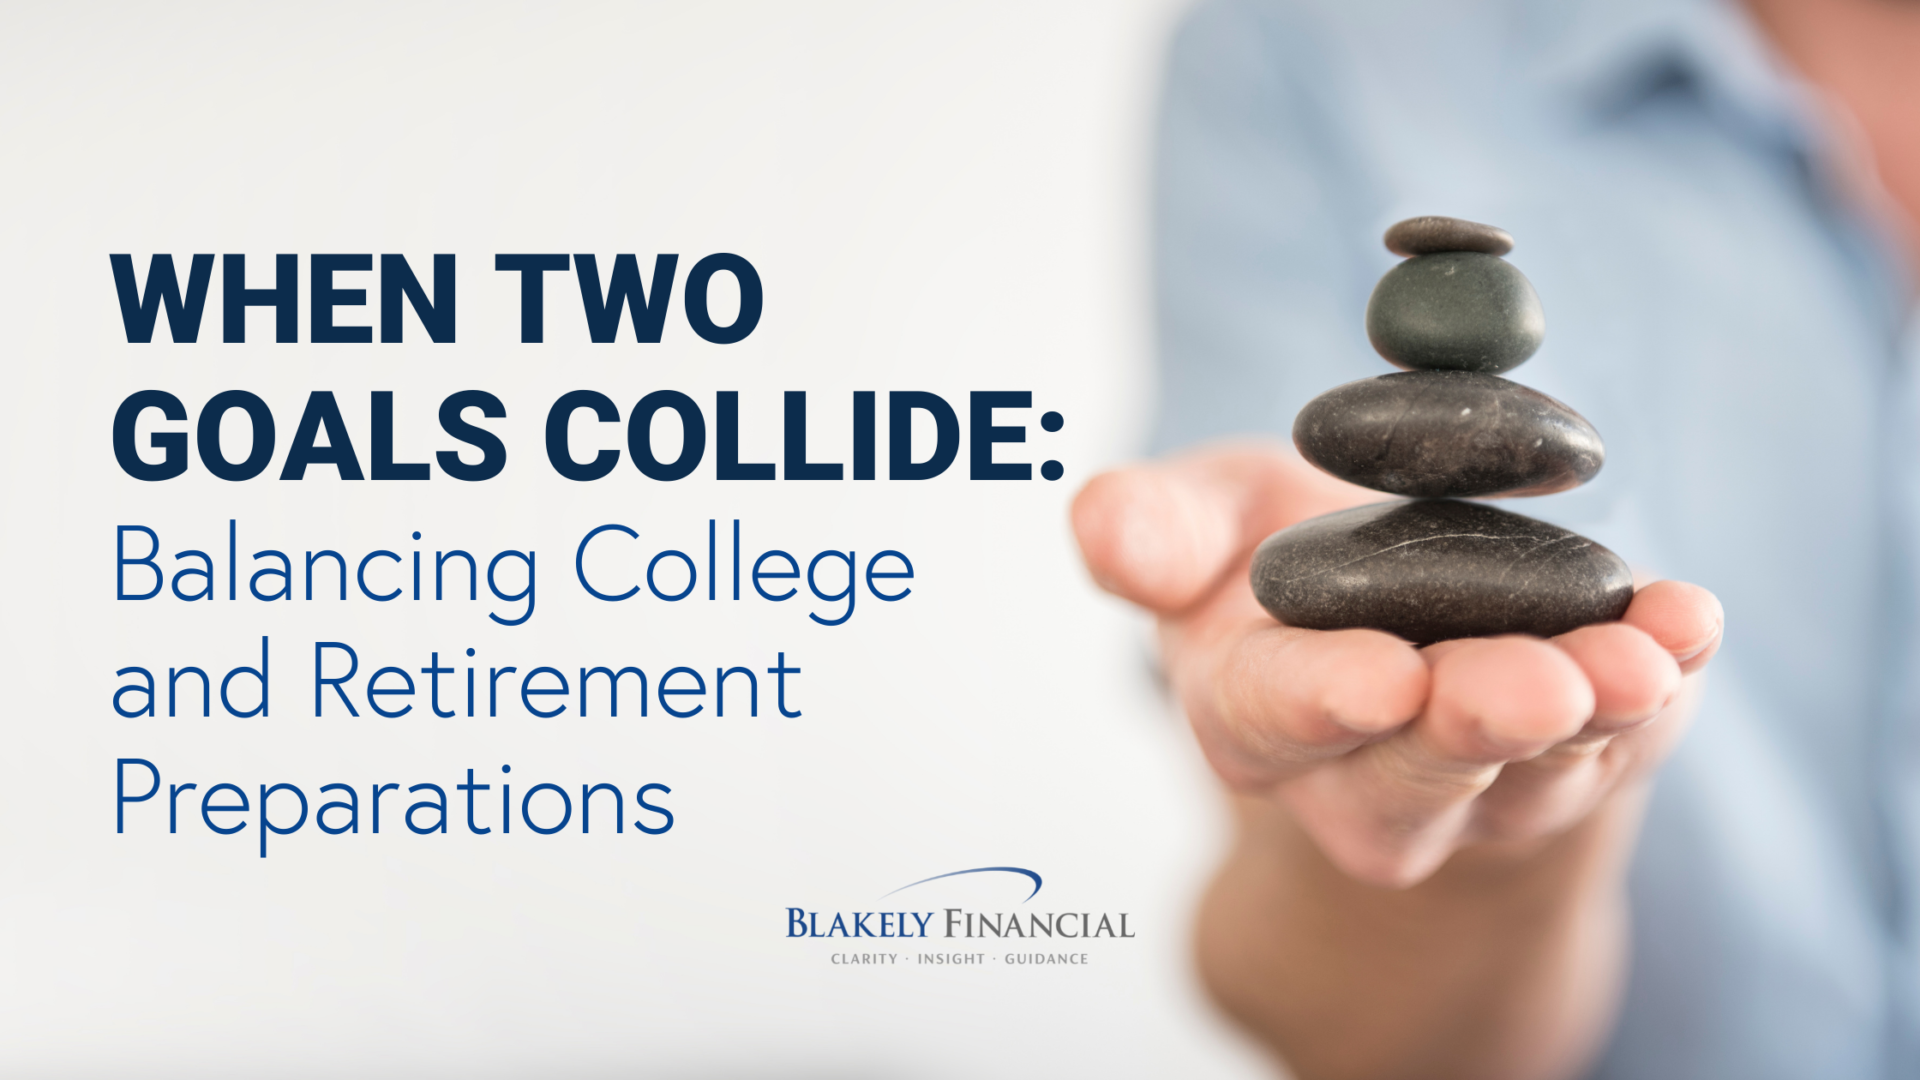 Blakely Financial When Two Goals Collide: Balancing College and Retirement Preparations